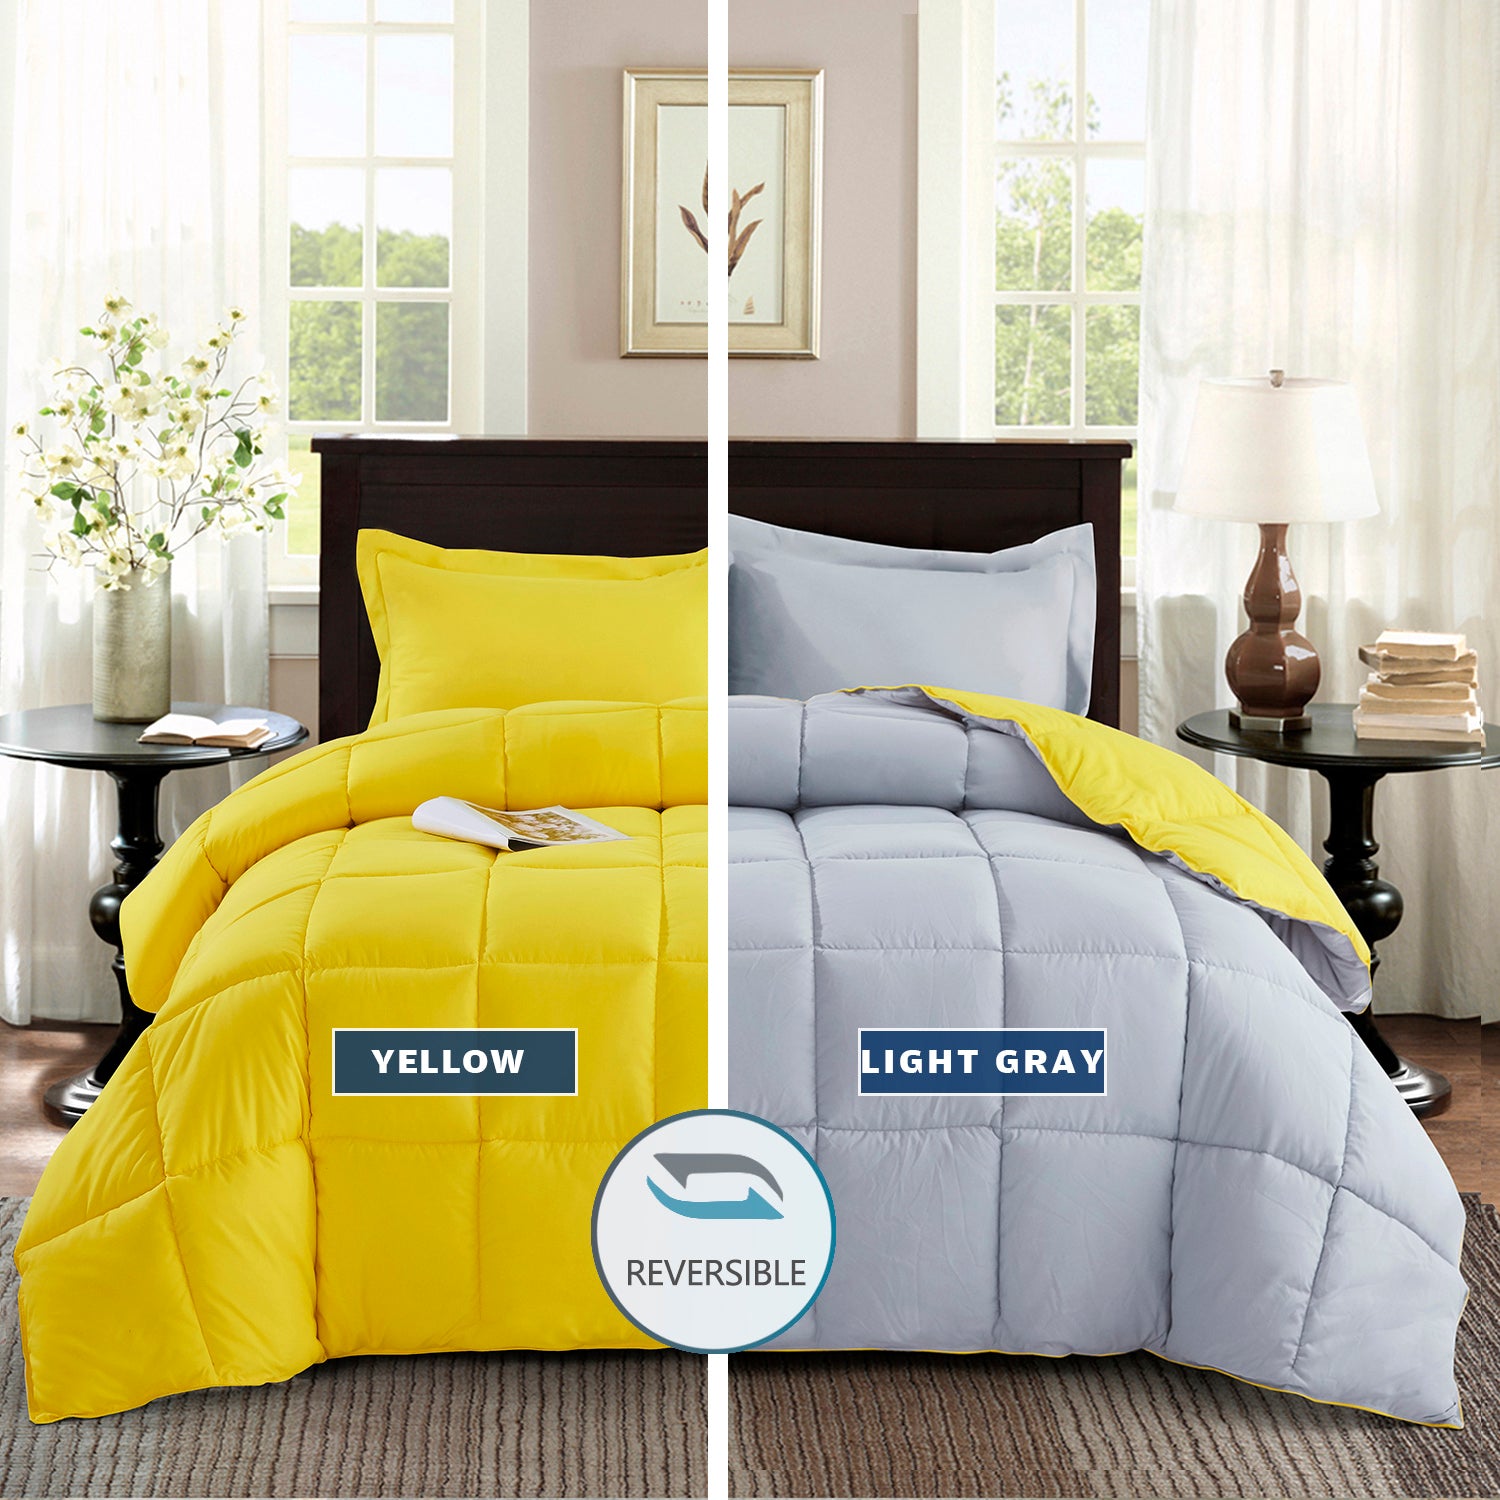 ALTERNATIVE DOWN 3PC REVERSIBLE COMFORTER. PERFECT FOR ANY SEASON. ULTRA SOFT MICROFIBER COVER. YELLOW / GRAY